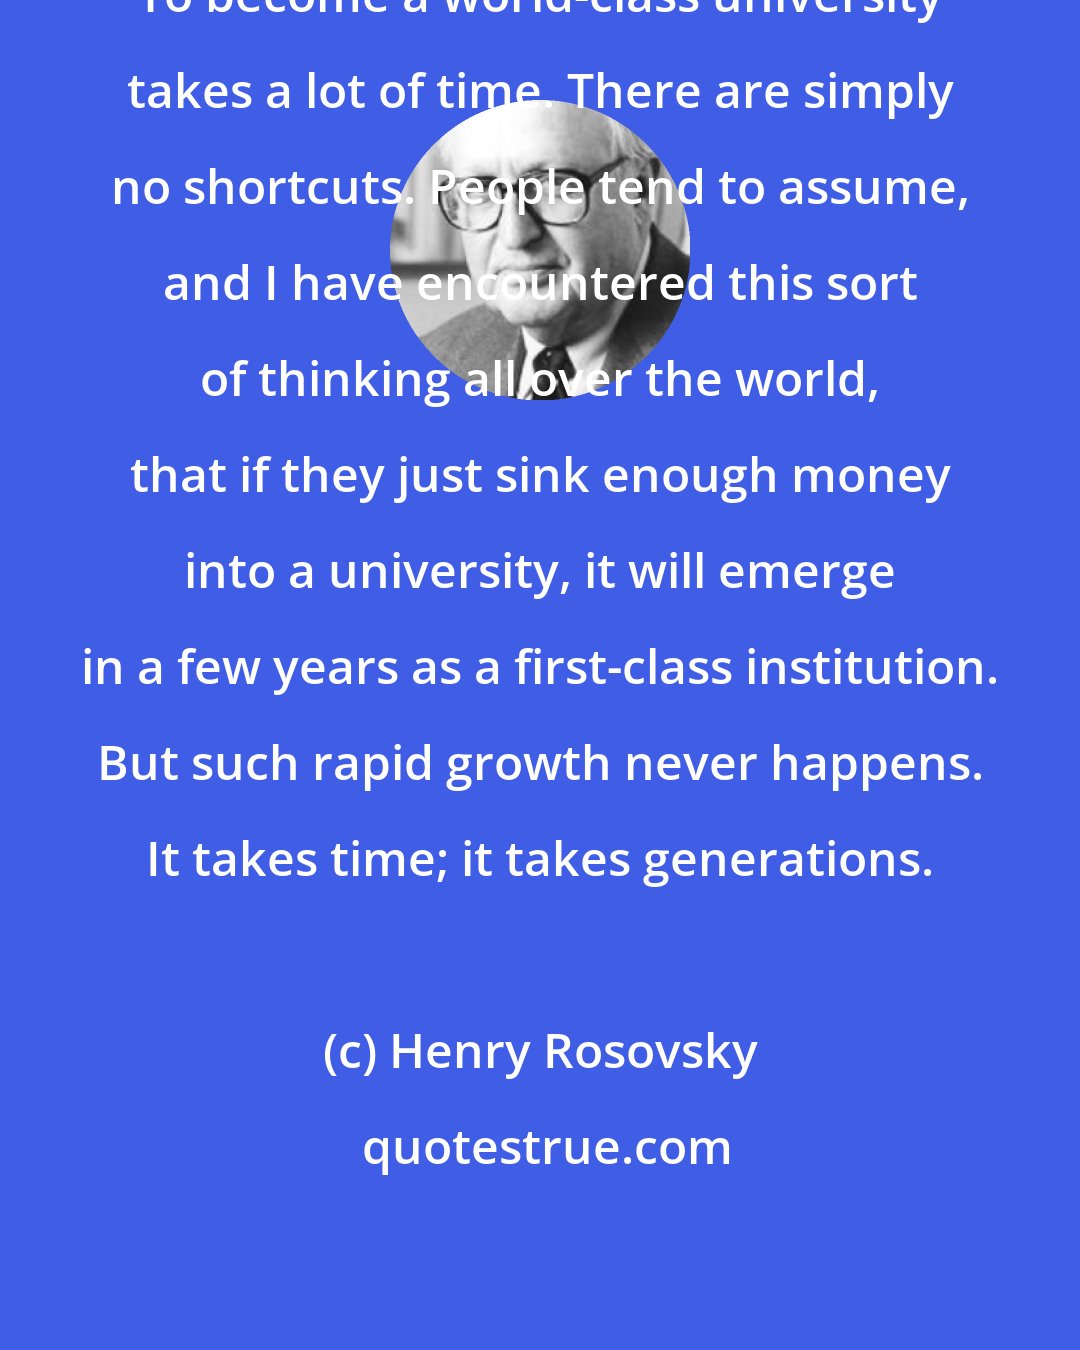 Henry Rosovsky: To become a world-class university takes a lot of time. There are simply no shortcuts. People tend to assume, and I have encountered this sort of thinking all over the world, that if they just sink enough money into a university, it will emerge in a few years as a first-class institution. But such rapid growth never happens. It takes time; it takes generations.